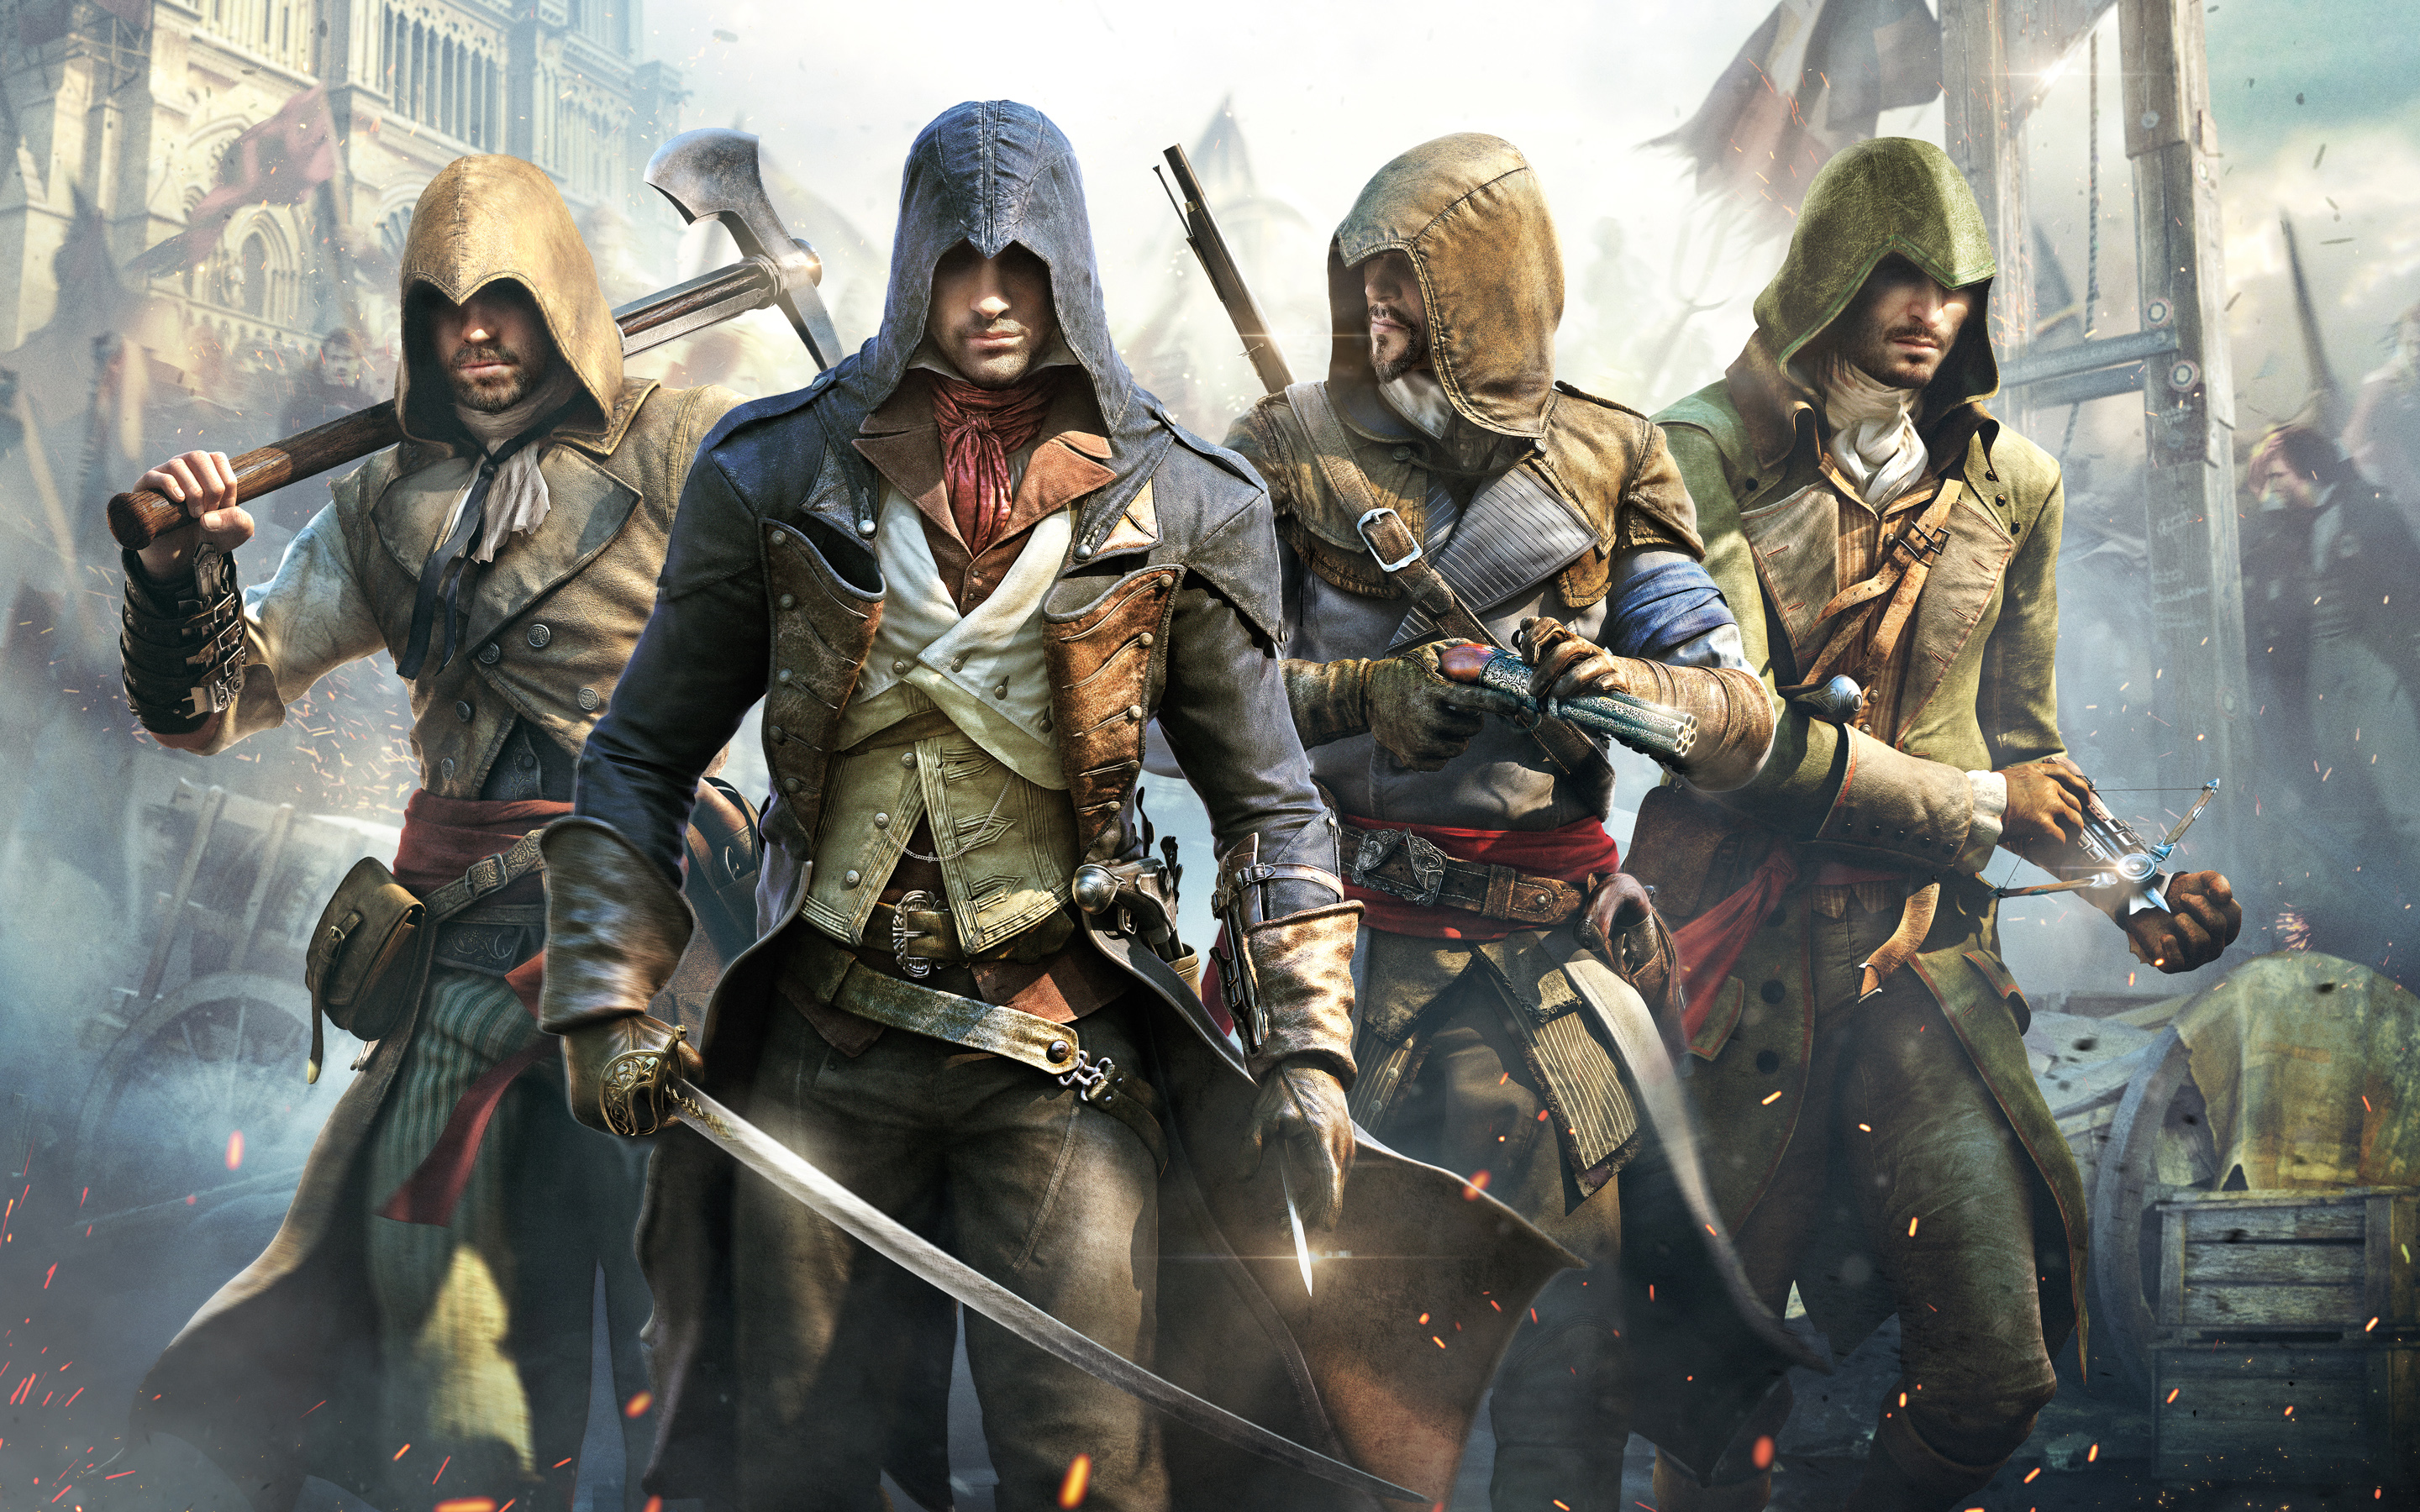 assassin's creed unity wallpaper hd,action adventure game,pc game,strategy video game,games,adventure game